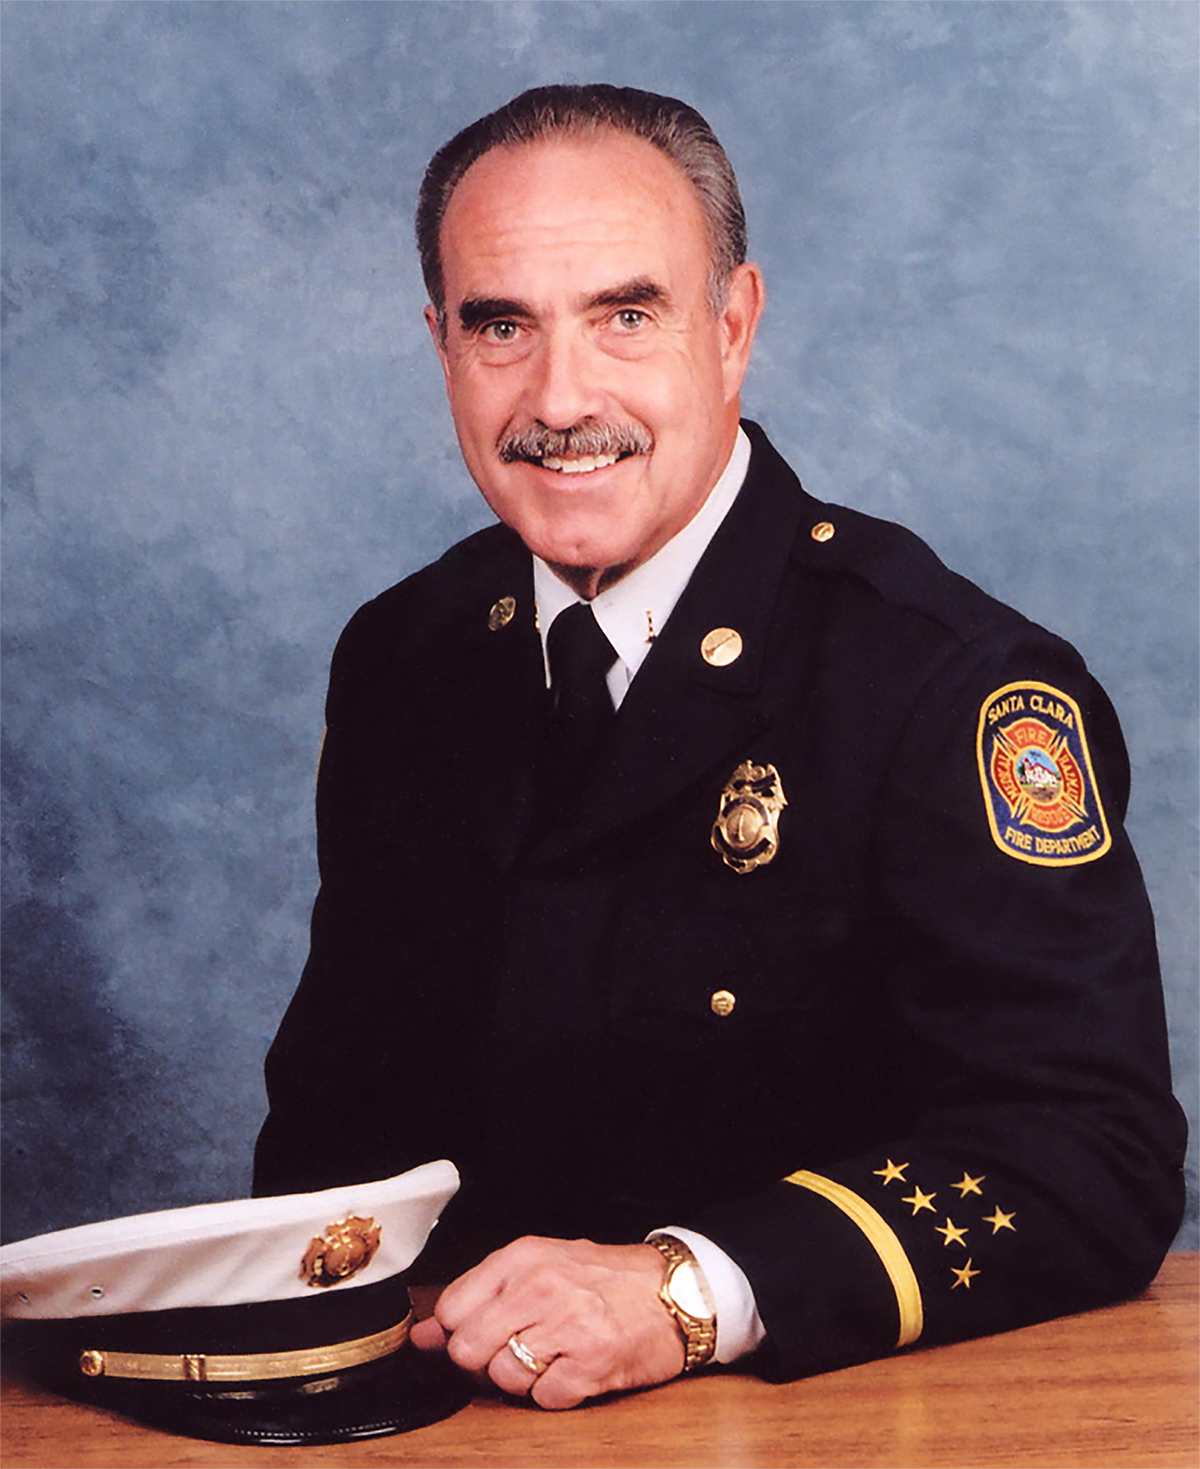 Pat Turner is a retired chief fire officer.  He proudly served for thirty years with the Santa Clara Fire Department in California. He advanced through the ranks to achieve the rank of Training Chief. He spent a considerable amount of time supervising the daily activities of Bravo Battalion and he successfully commanded a significant number of greater alarm fires during his career.

Chief Turner maintains certification as an instructor through the State Fire Marshal’s Office of Education. He trains prospective fire officers in areas involving instruction, command, investigation and others.

He has successfully completed an intensive upper level course of study and practical application of skills to earn his certification as a Master Instructor. He has taught many officer groups throughout the state.

He graduated with honors from the Fire Technology program at Mission College in Santa Clara, CA.